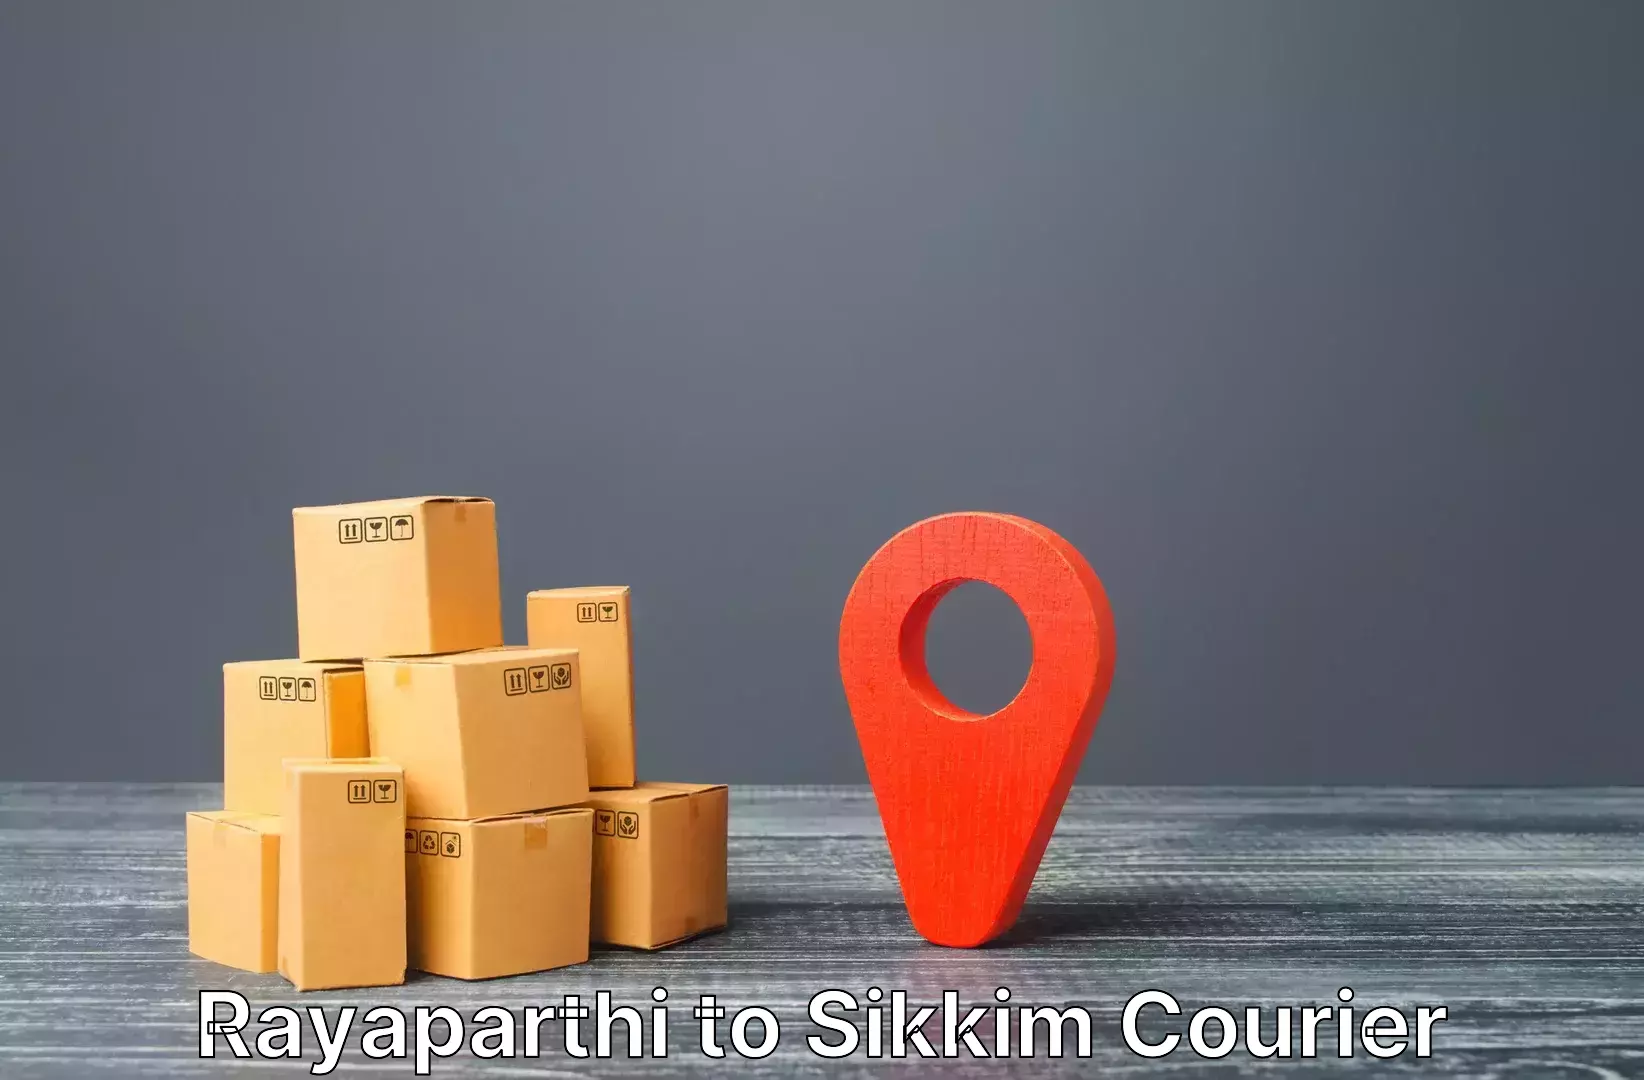 Airport luggage delivery Rayaparthi to Sikkim